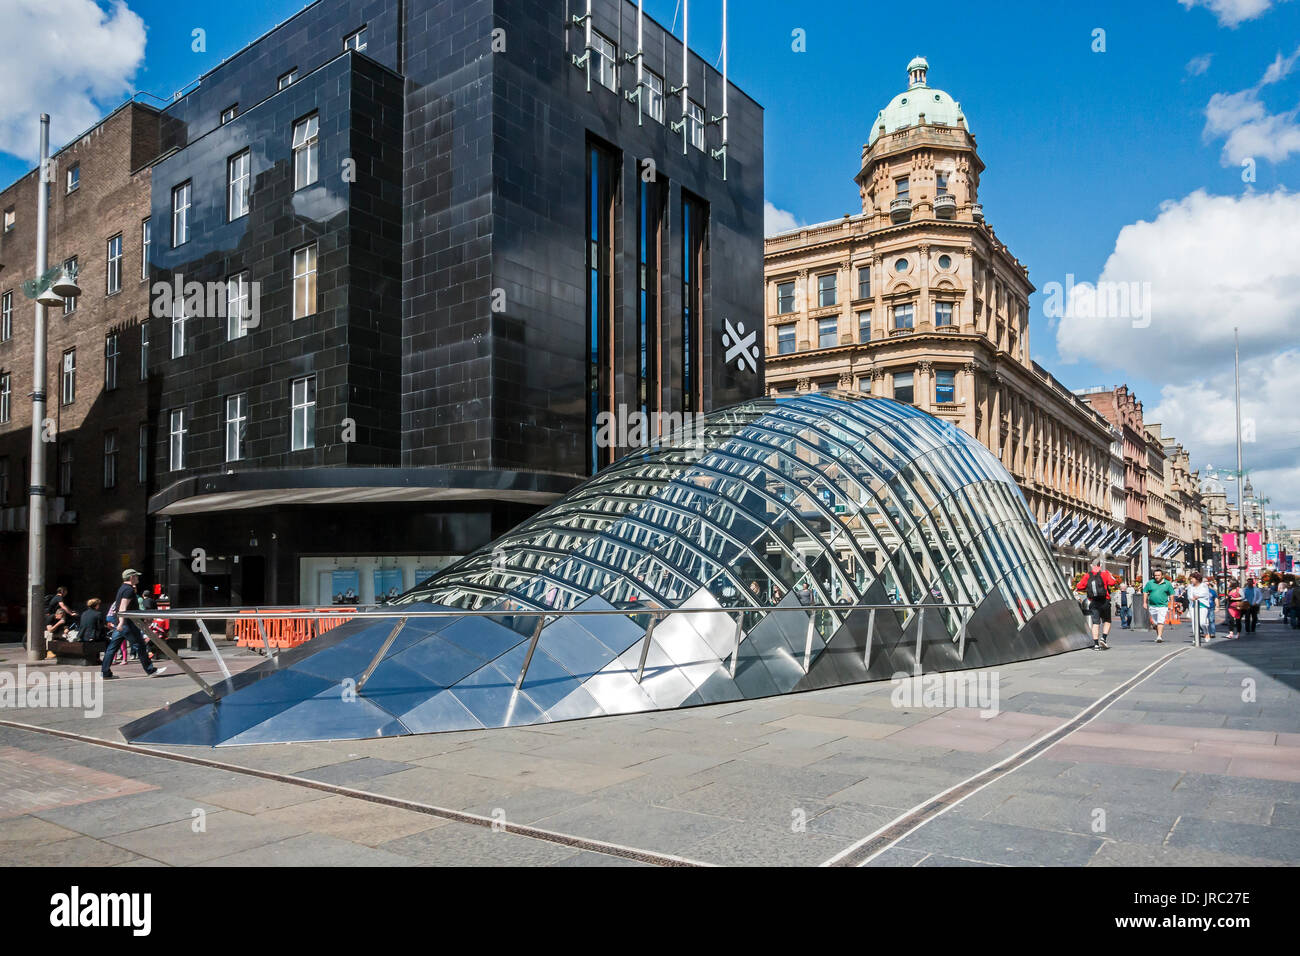 Entrance to the north facing SPT Glasgow underground Subway station in St Enoch Square Glasgow city Scotland UK Stock Photo